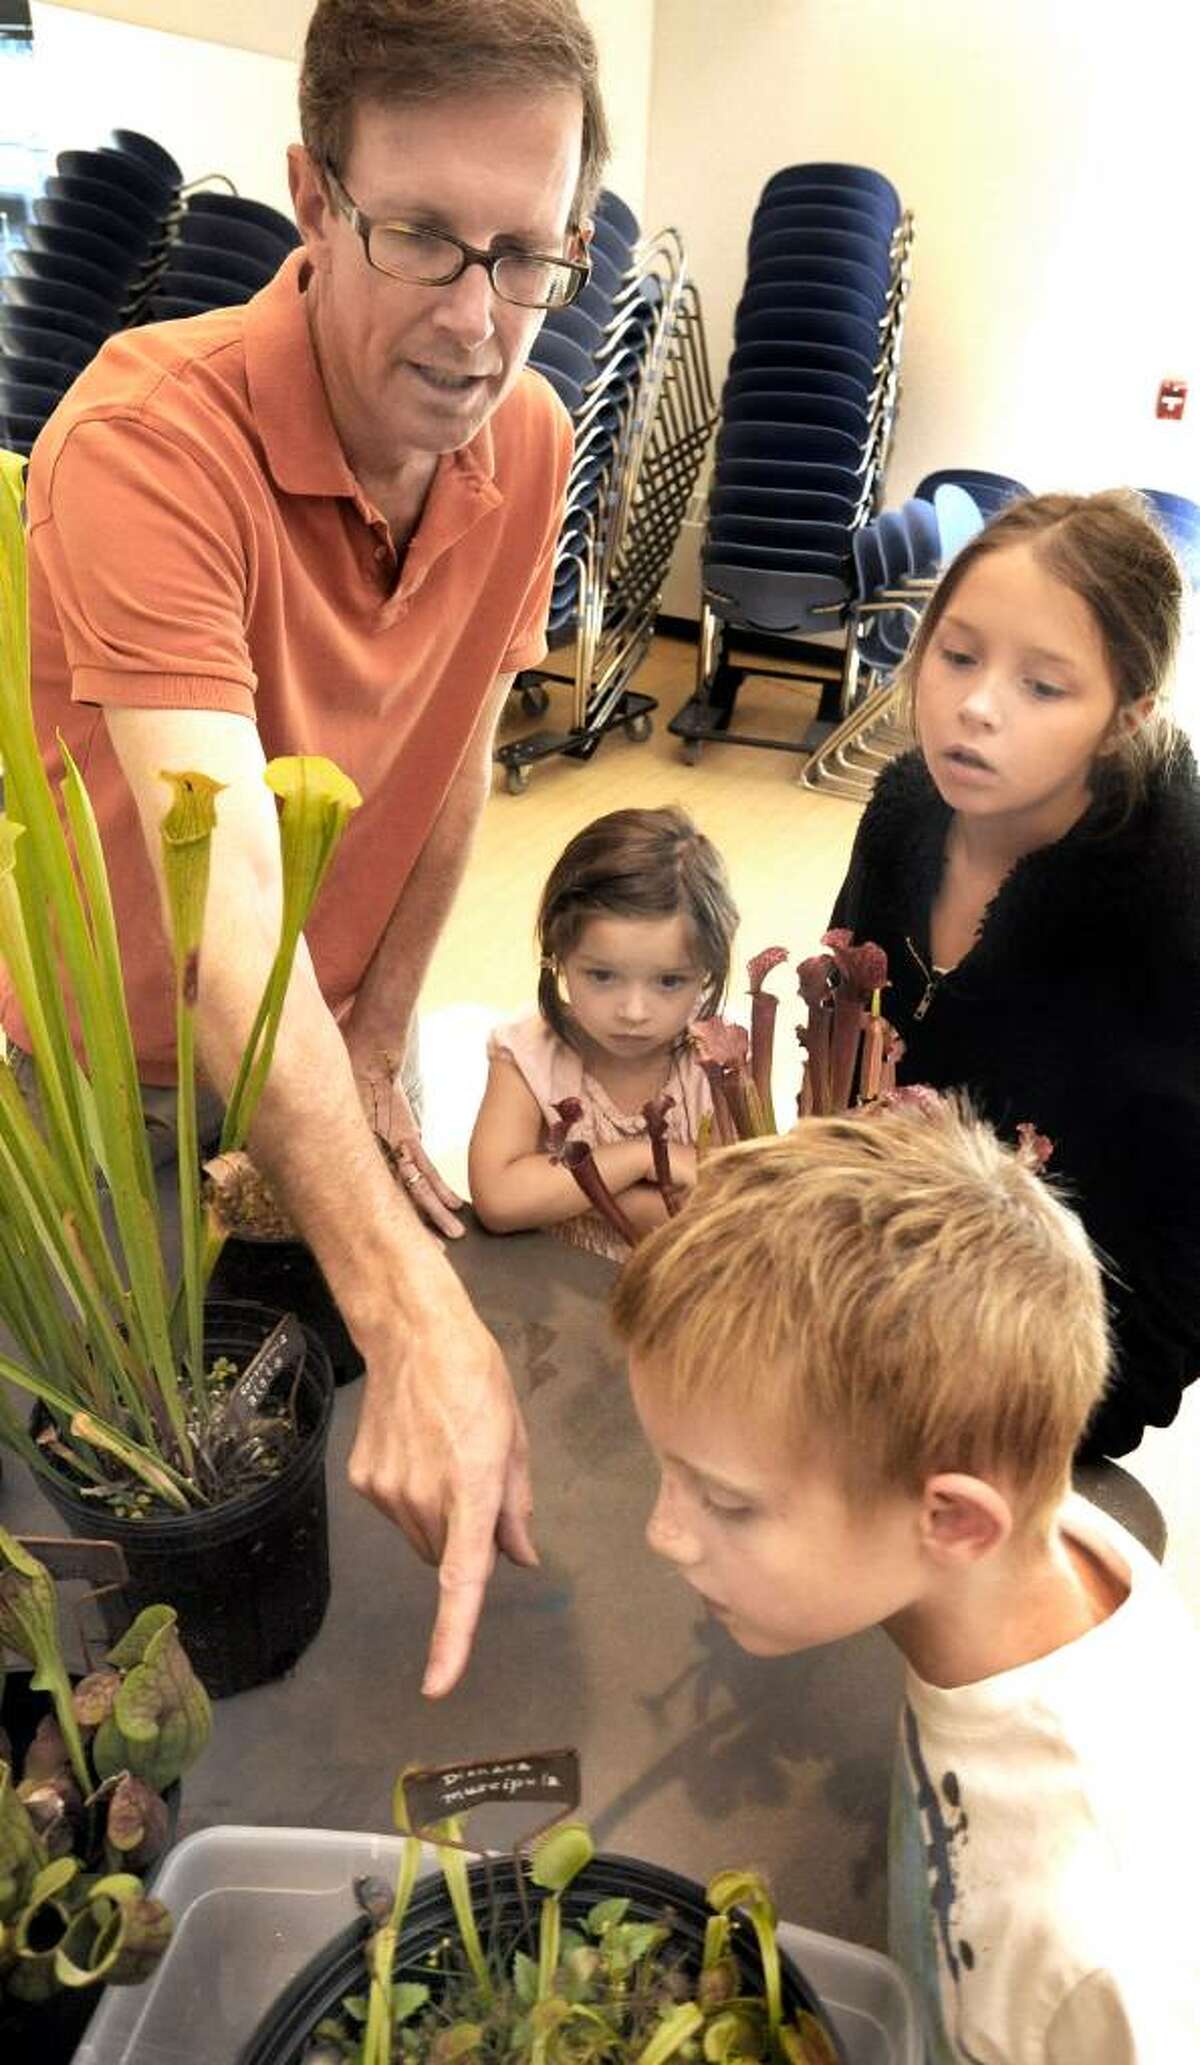 Plant specialist Matt Robey, of Redding, points out venus flytraps to Aidan Buss, 6, of Old Greenwich, and sisters Audrey, 5 and Eleanor DePalma, 10, of Ridgefield, during a program on carnivorus plants at the Ridgefield Recreation Center on saturday.